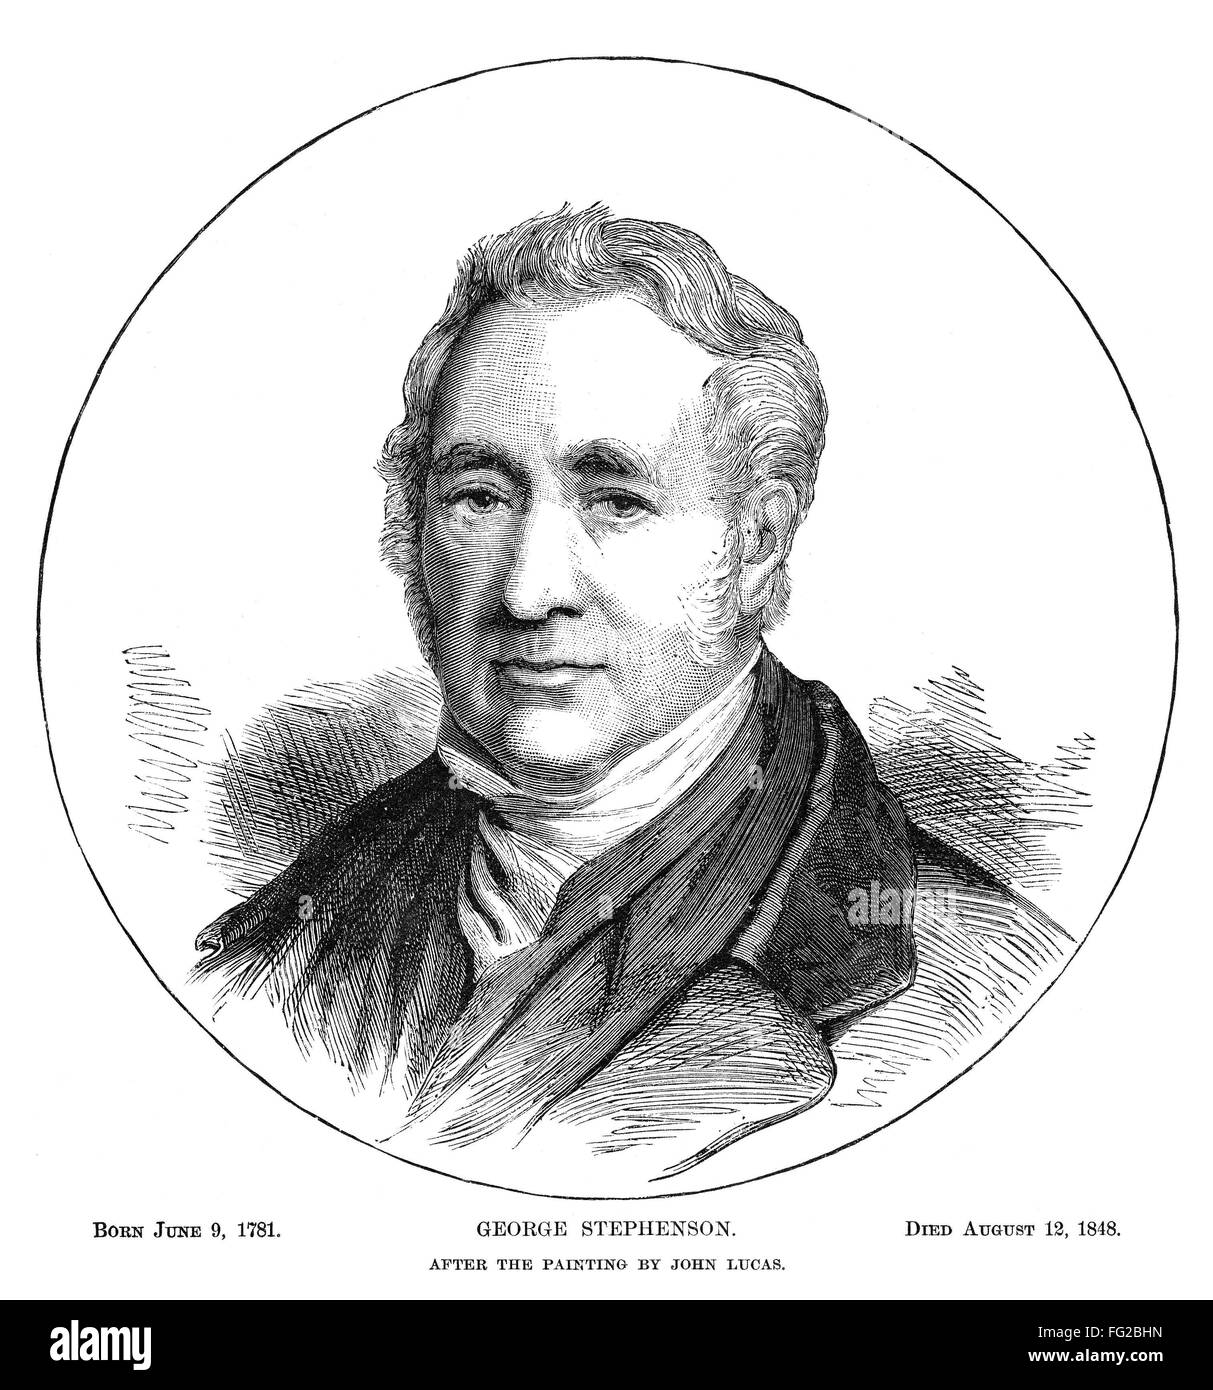 GEORGE STEPHENSON /n(1781-1848). English inventor and founder of railways. Engraving after a painting by John Lucas, American, 1881. Stock Photo